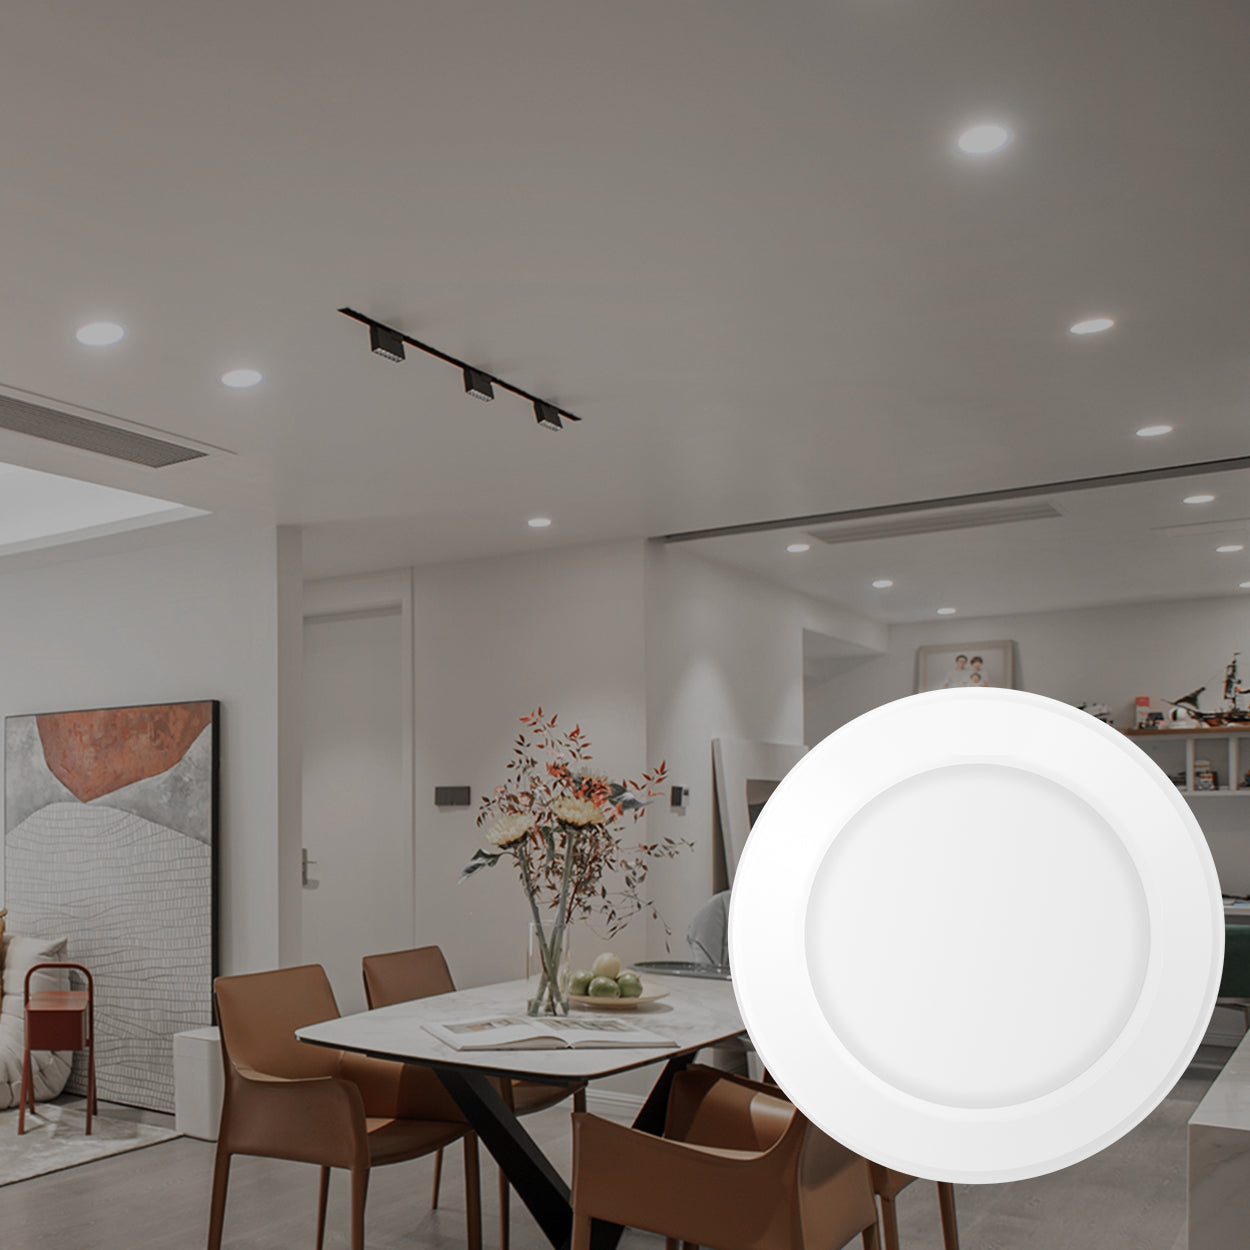 Amico recessed led disk light